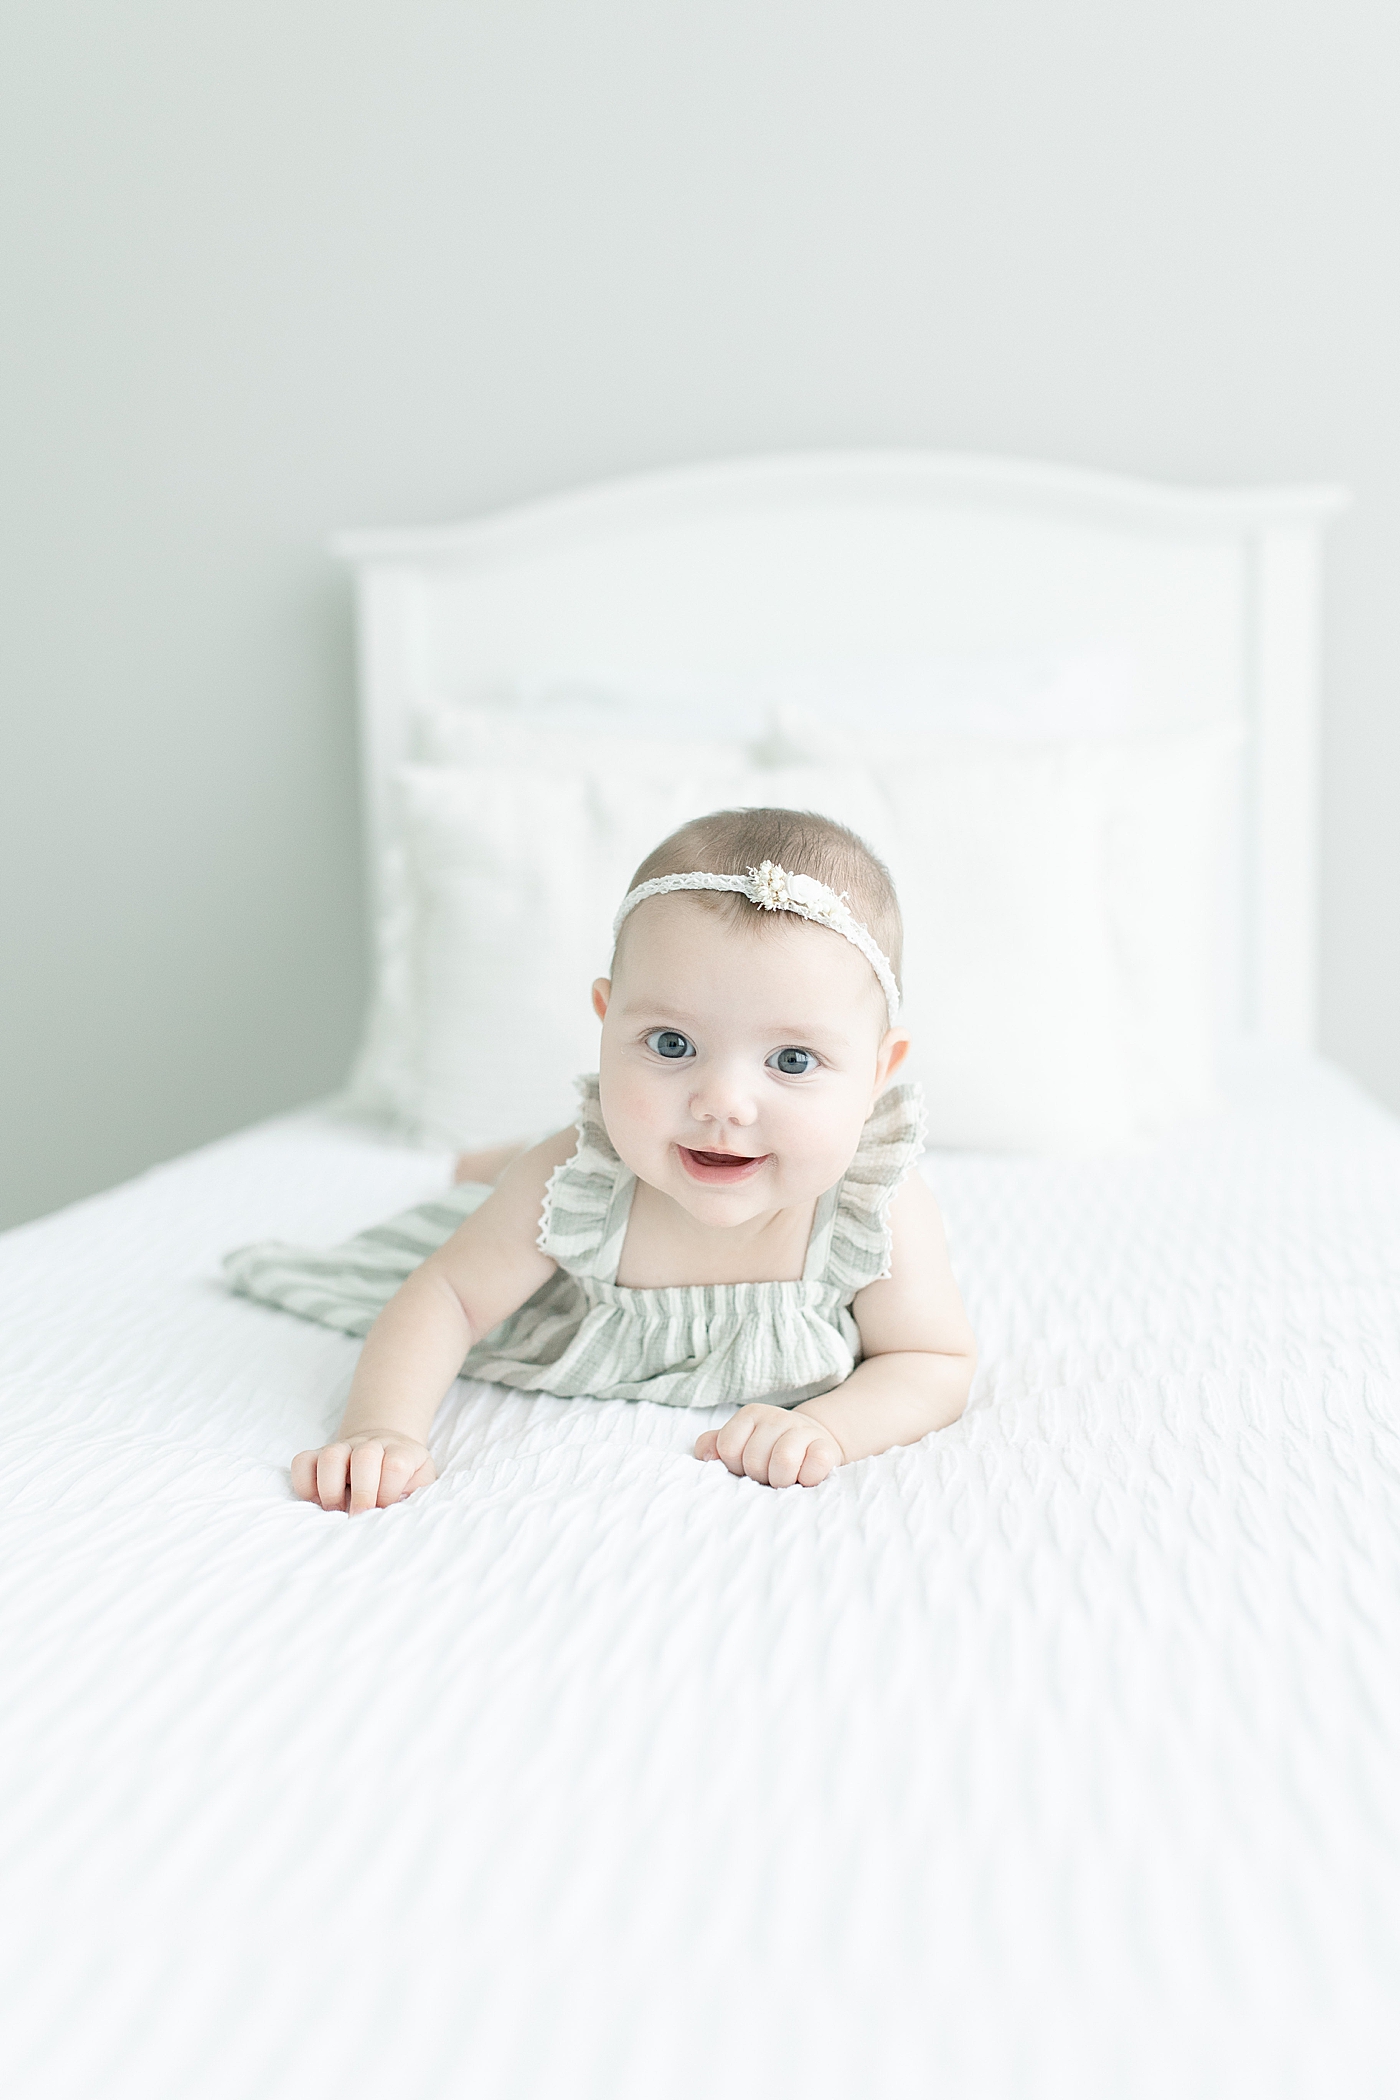 Baby girl in stripes smiling while laying on her belly | Photo by Little Sunshine Photography